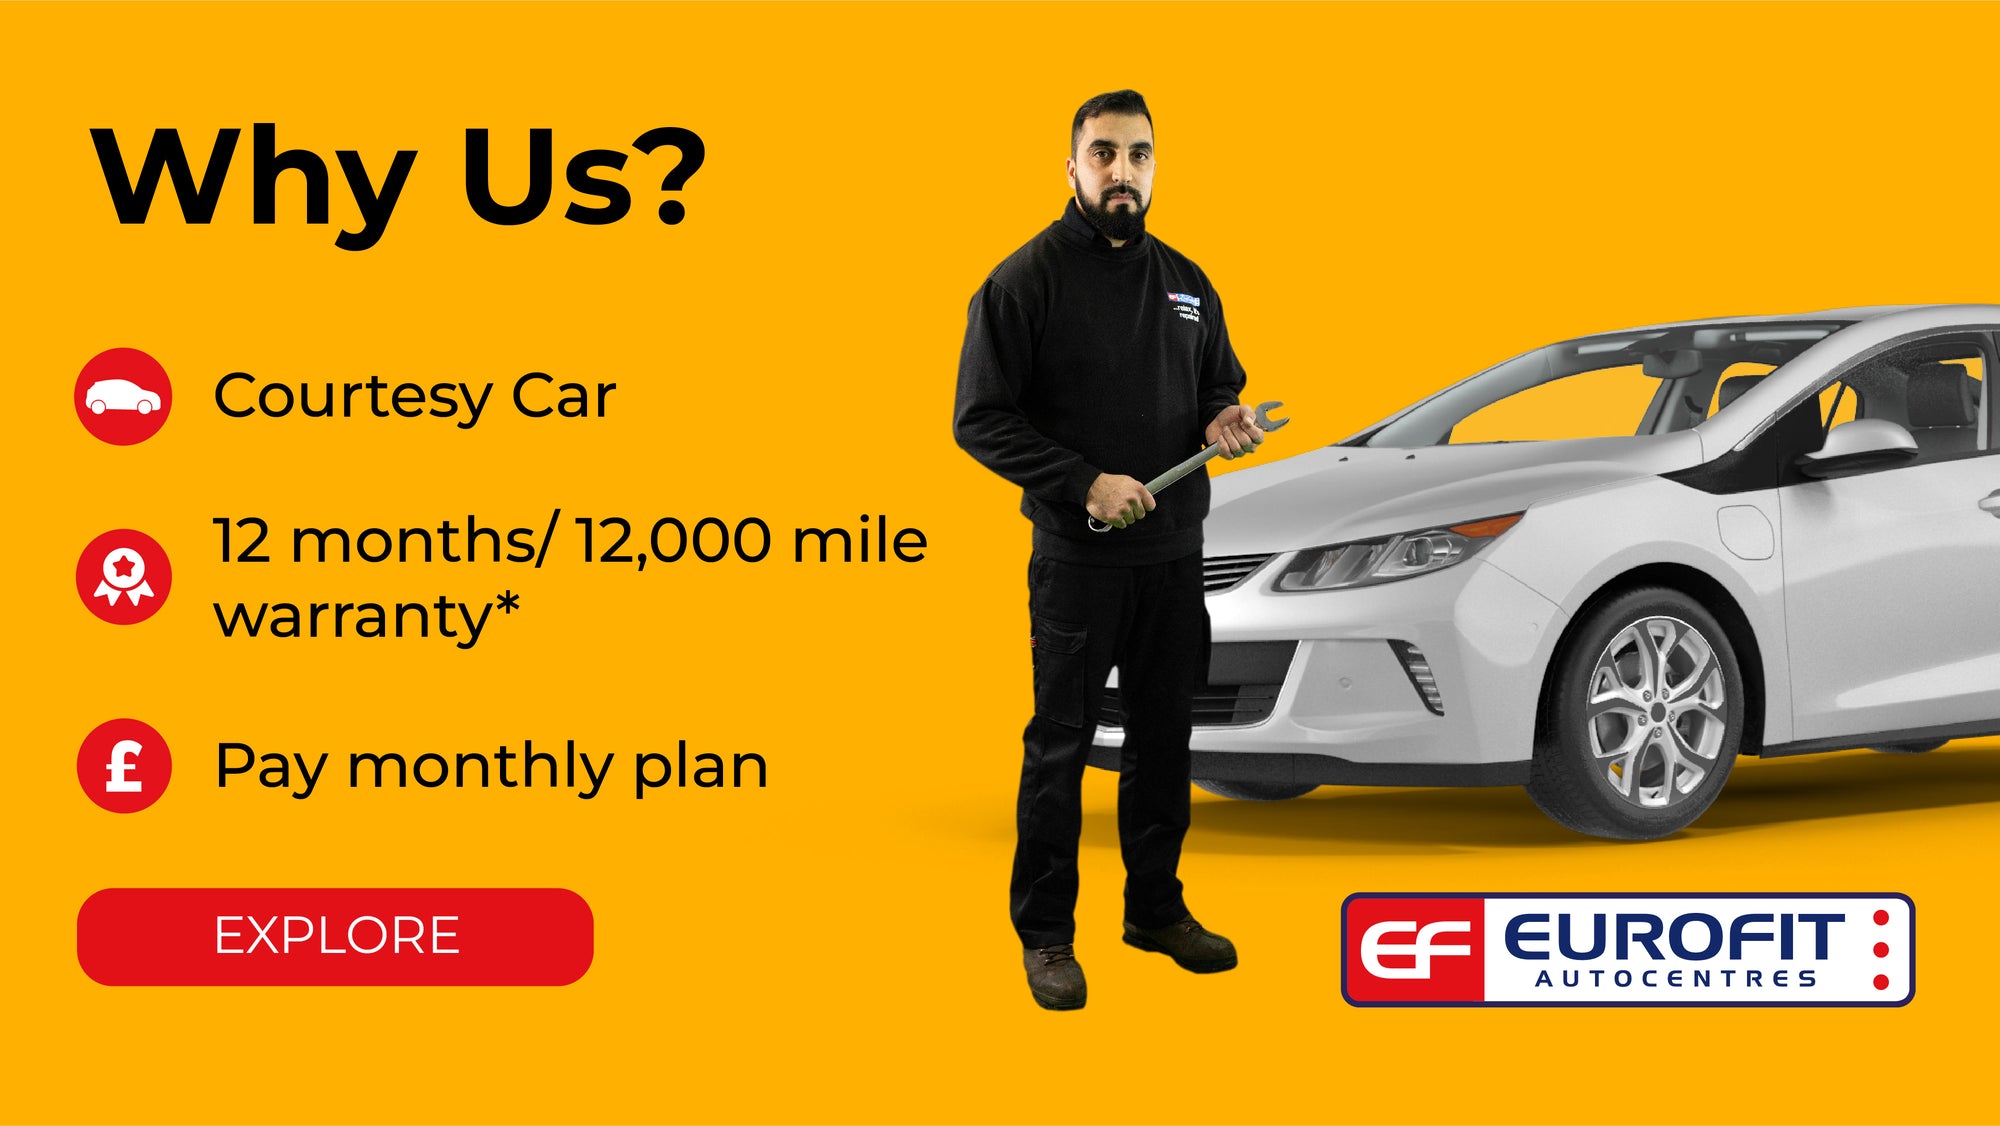 EUROFIT AUTOCENTRES OFFERS COURTESY CAR, 12 MONTHS WARRANTY AND A PAY MONTHLY PLAN 